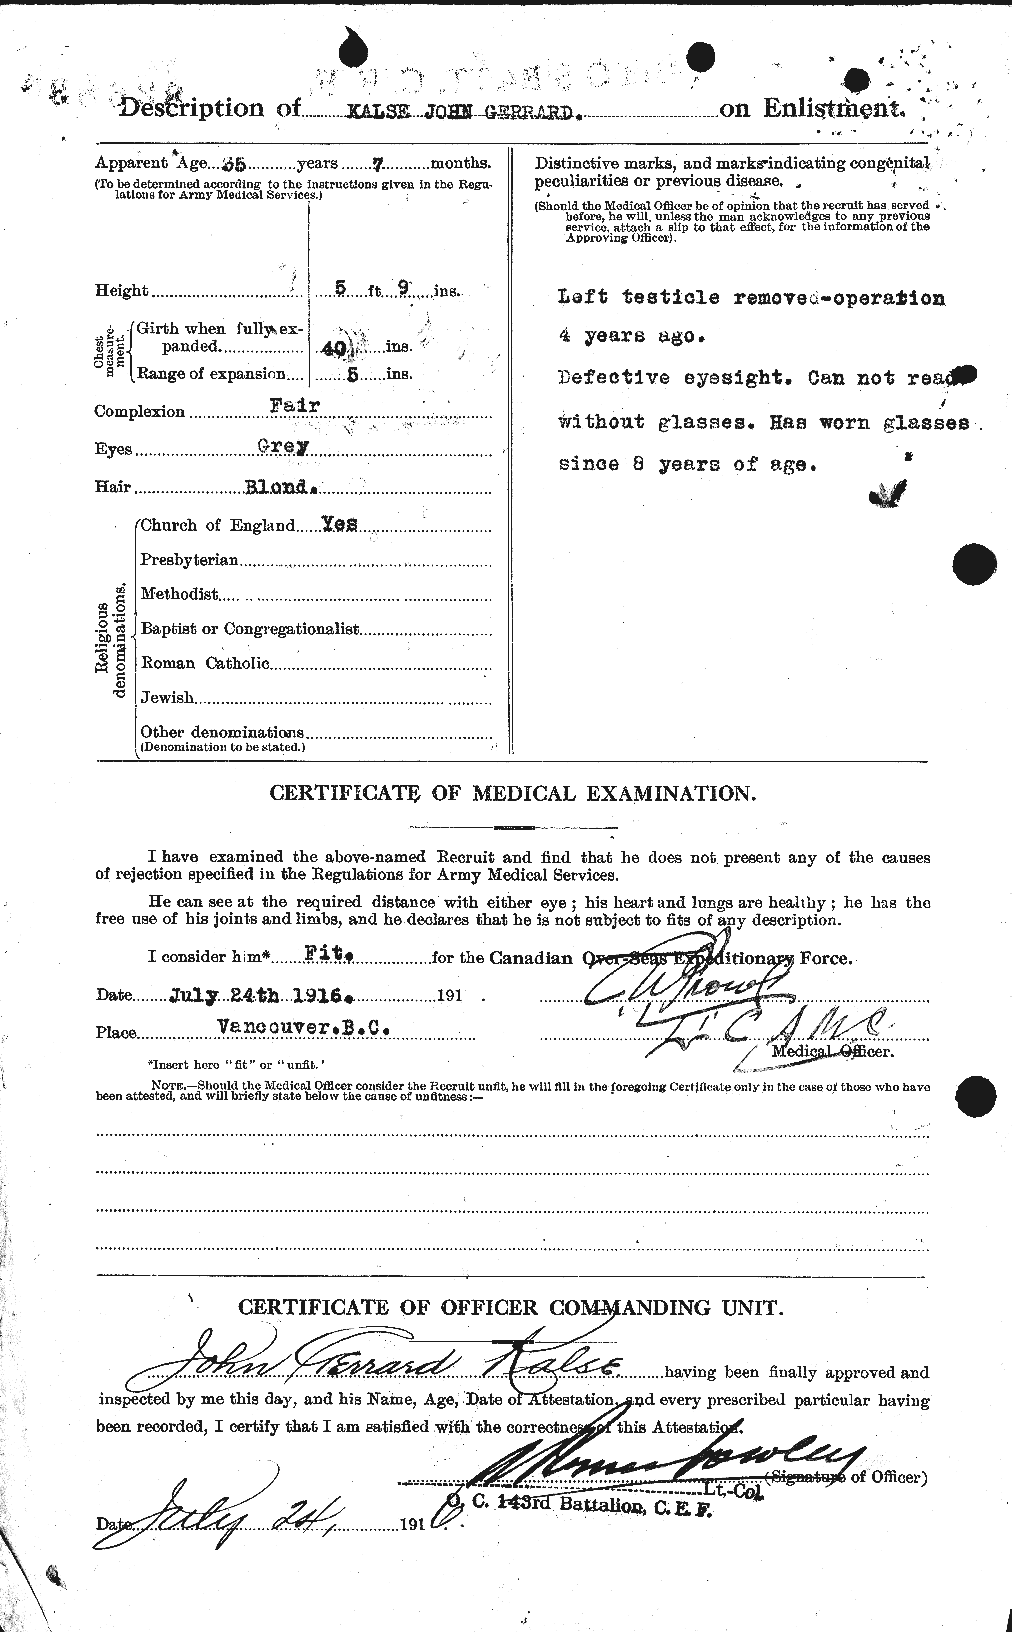 Personnel Records of the First World War - CEF 428343b